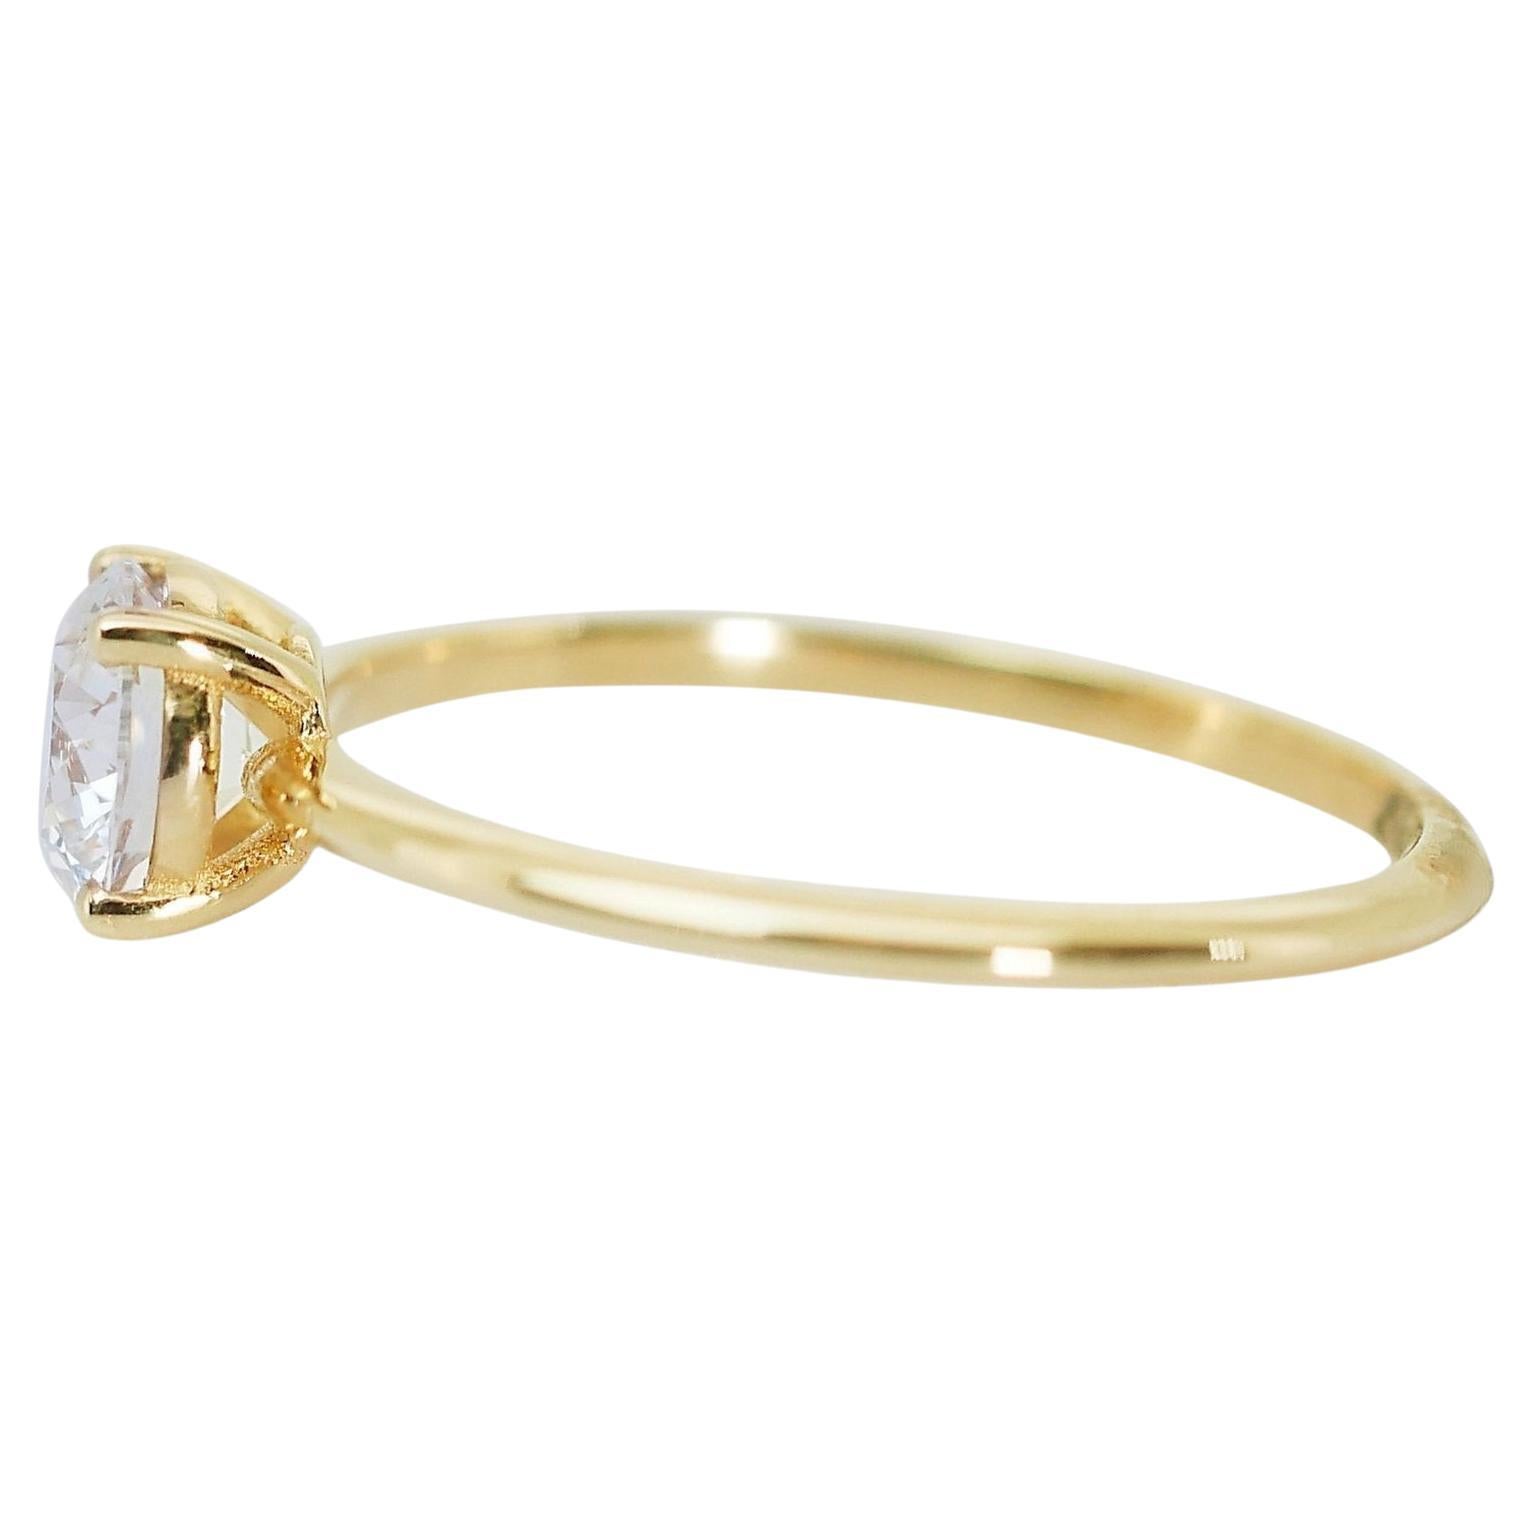 Radiant 1.02ct Round Solitaire Diamond Ring in 18k Yellow Gold - GIA Certified

Discover luxury and purity with this stunning diamond solitaire ring, crafted in 18k yellow gold. Certified by GIA, this ring promises superior quality and timeless